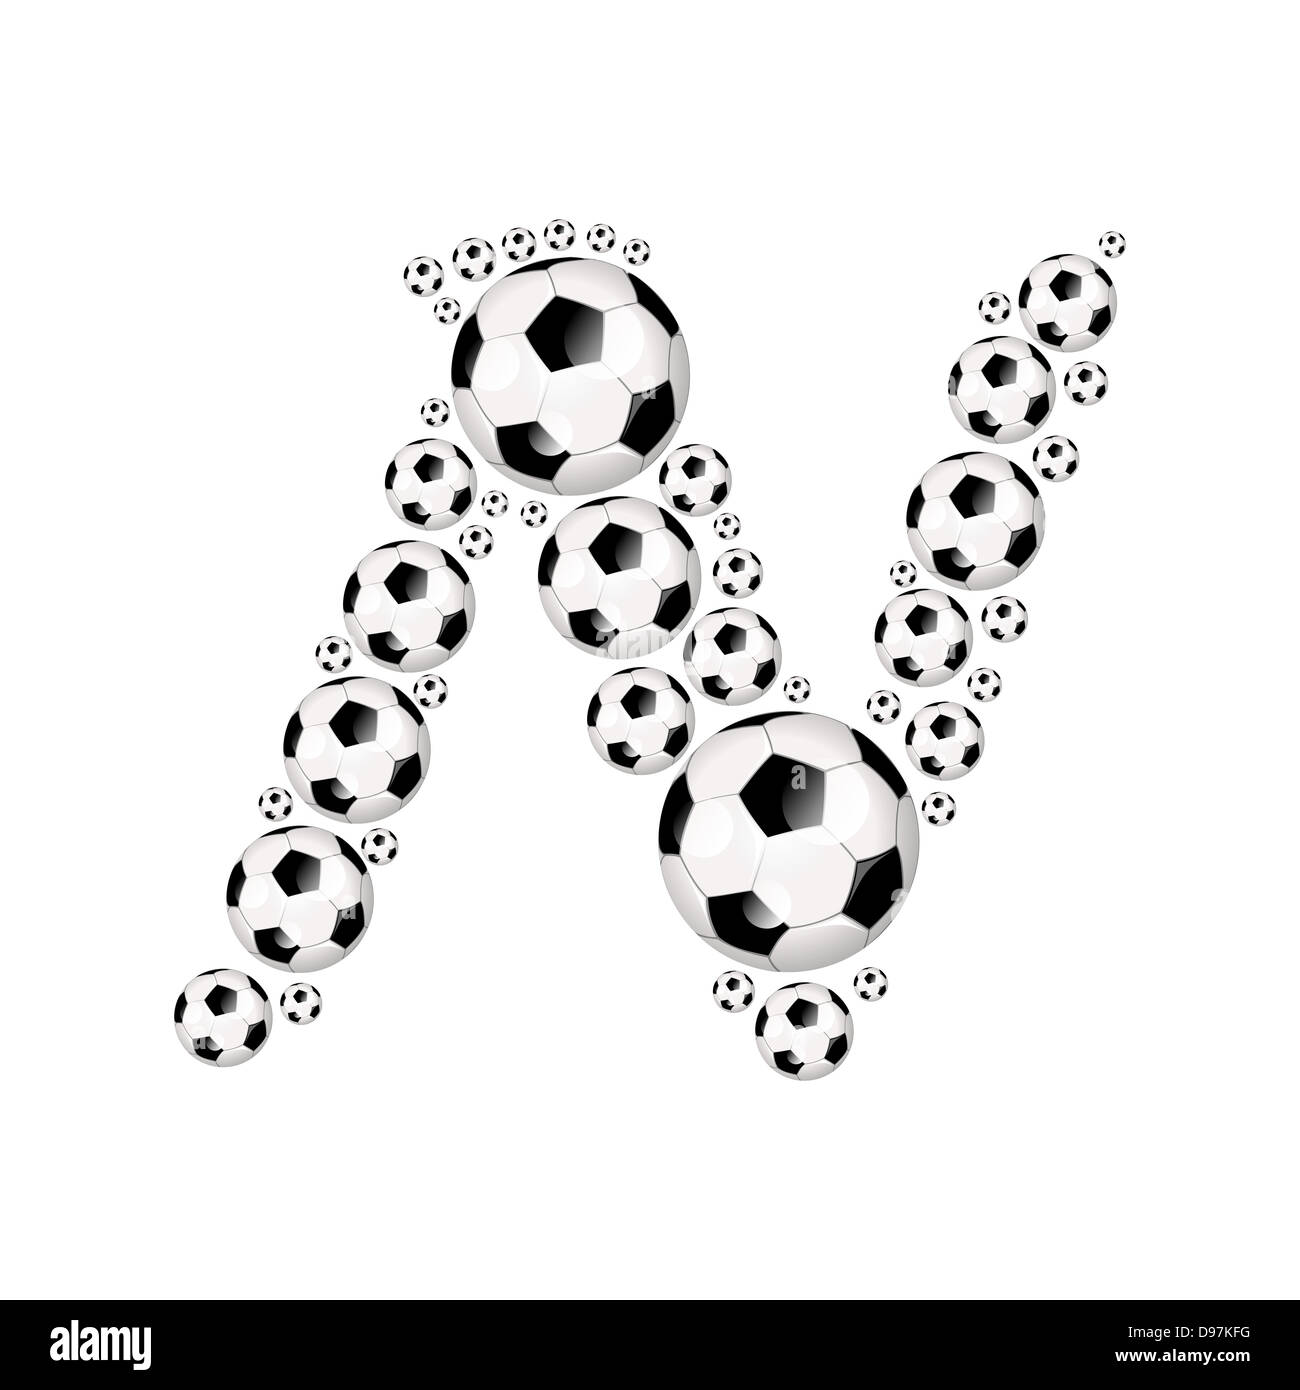 Soccer alphabet capital letter N illustration icon with soccer or footballs Stock Photo